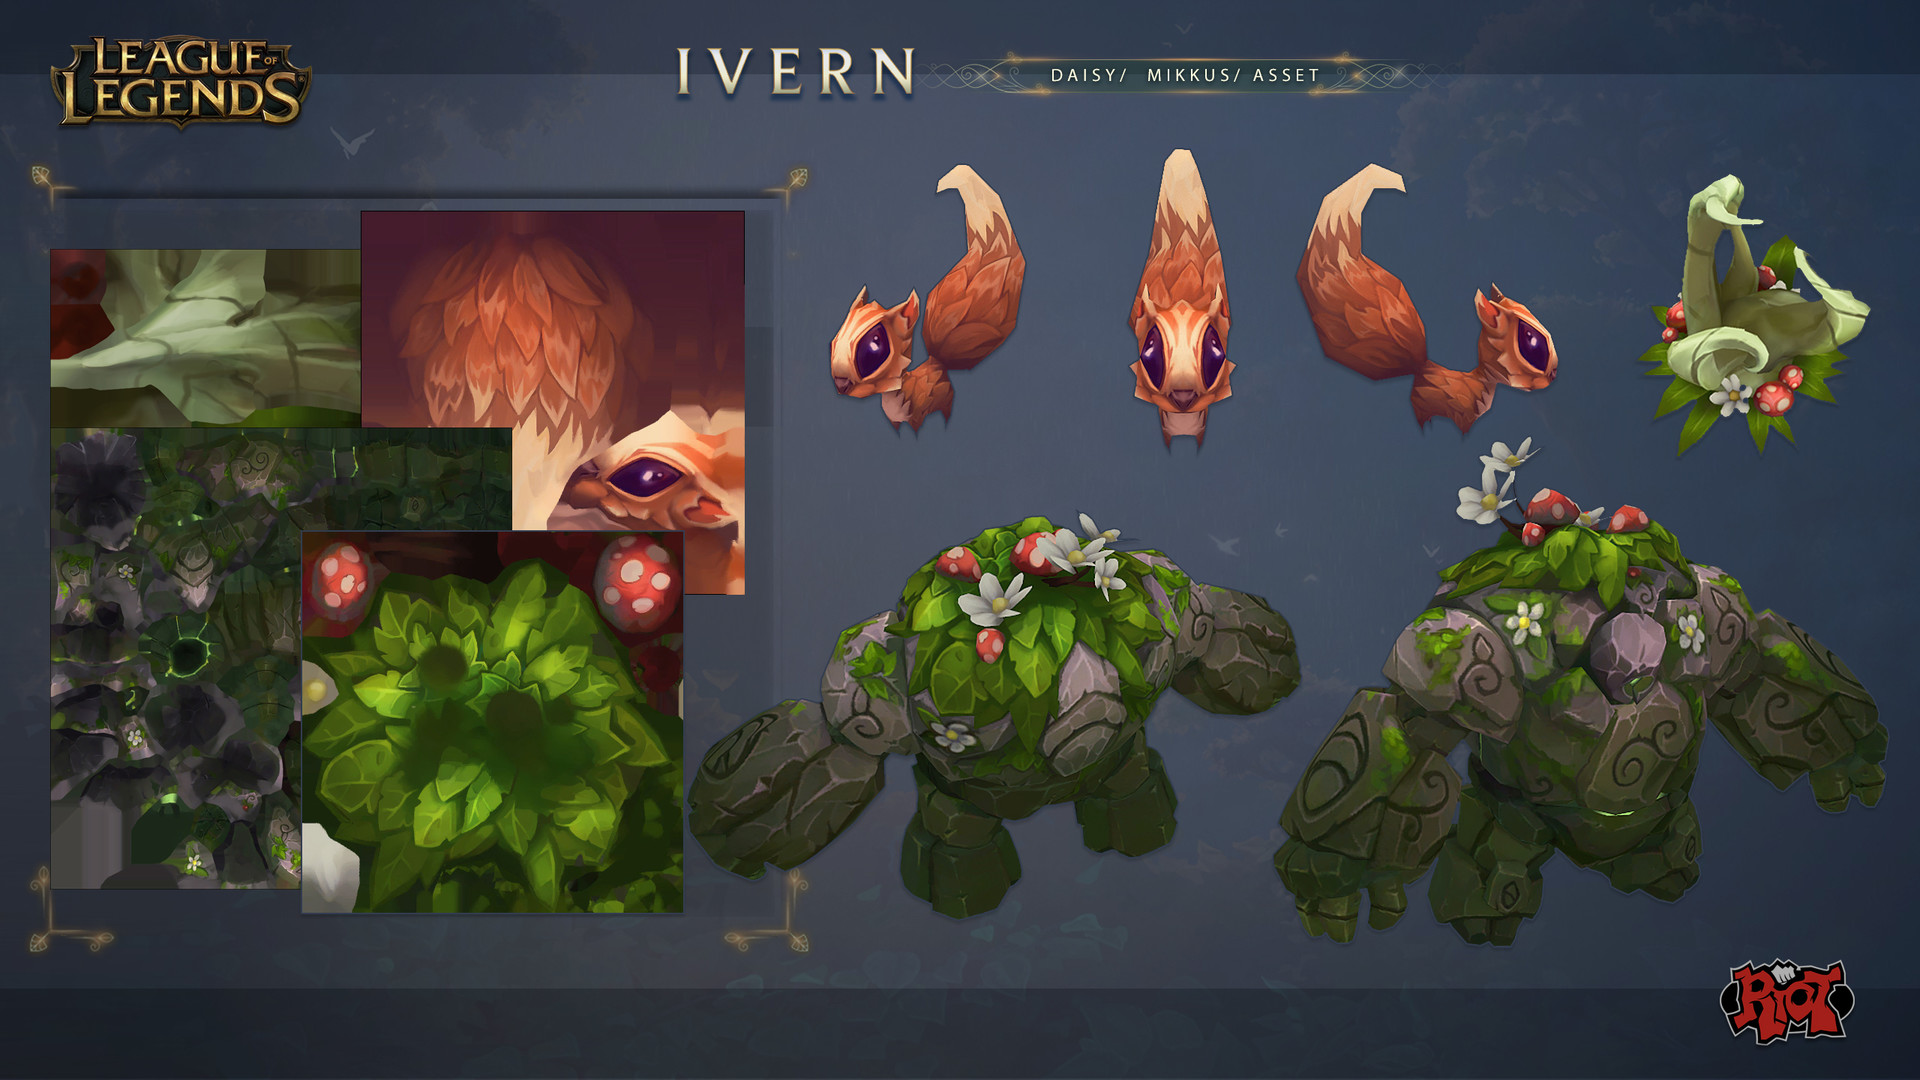 ArtStation - Ivern "The Green Father" - InGame League of Legends, Daniel Orive